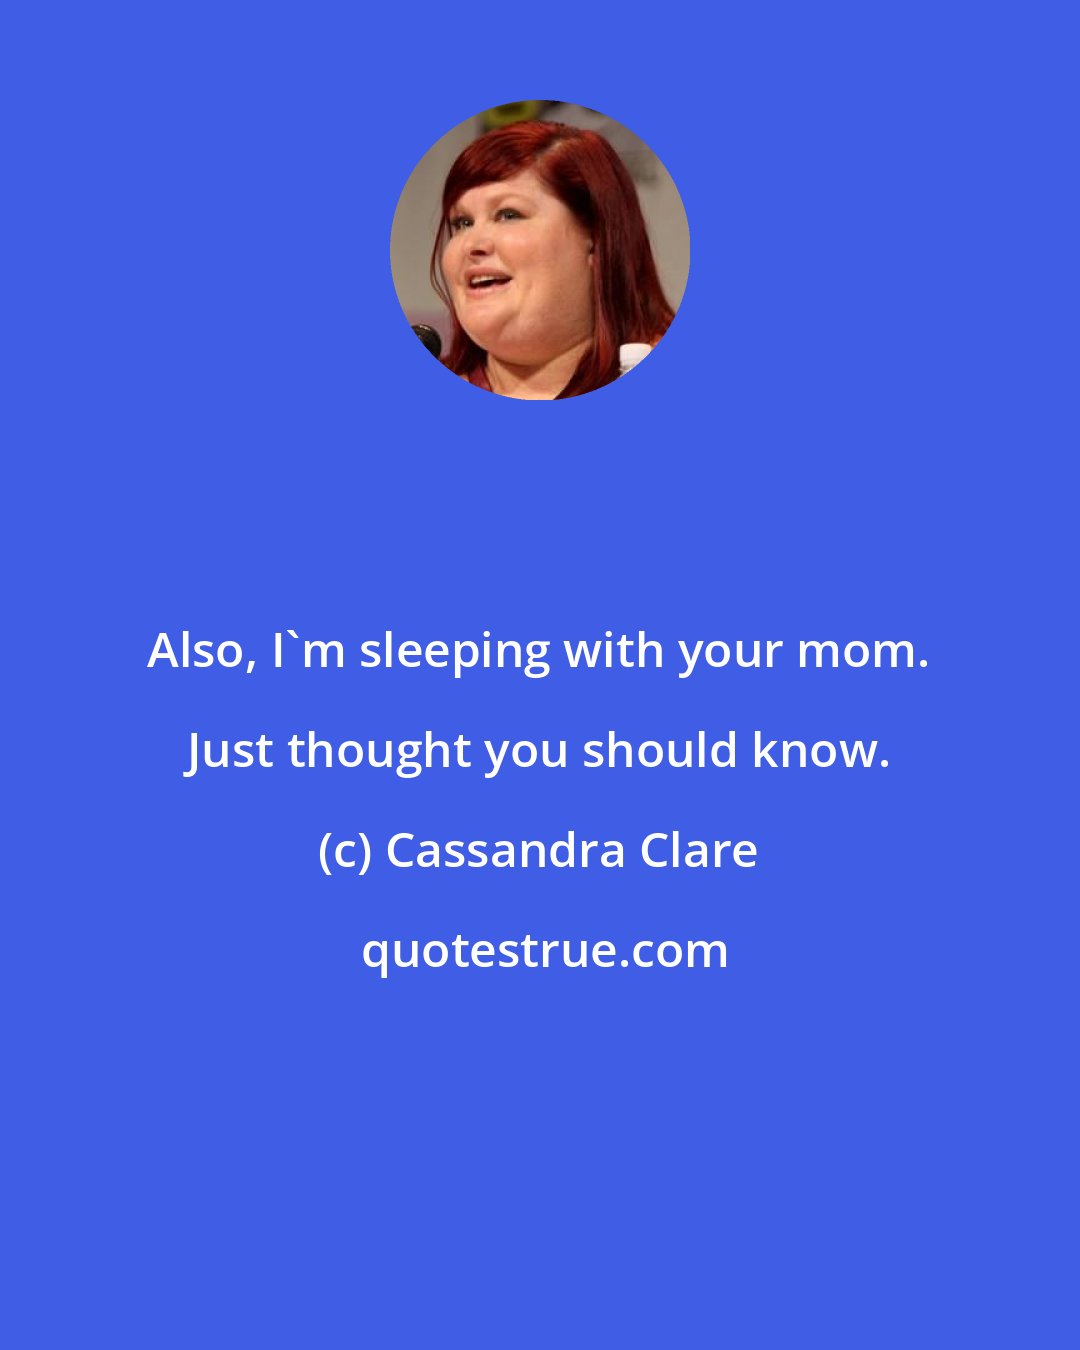 Cassandra Clare: Also, I'm sleeping with your mom. Just thought you should know.